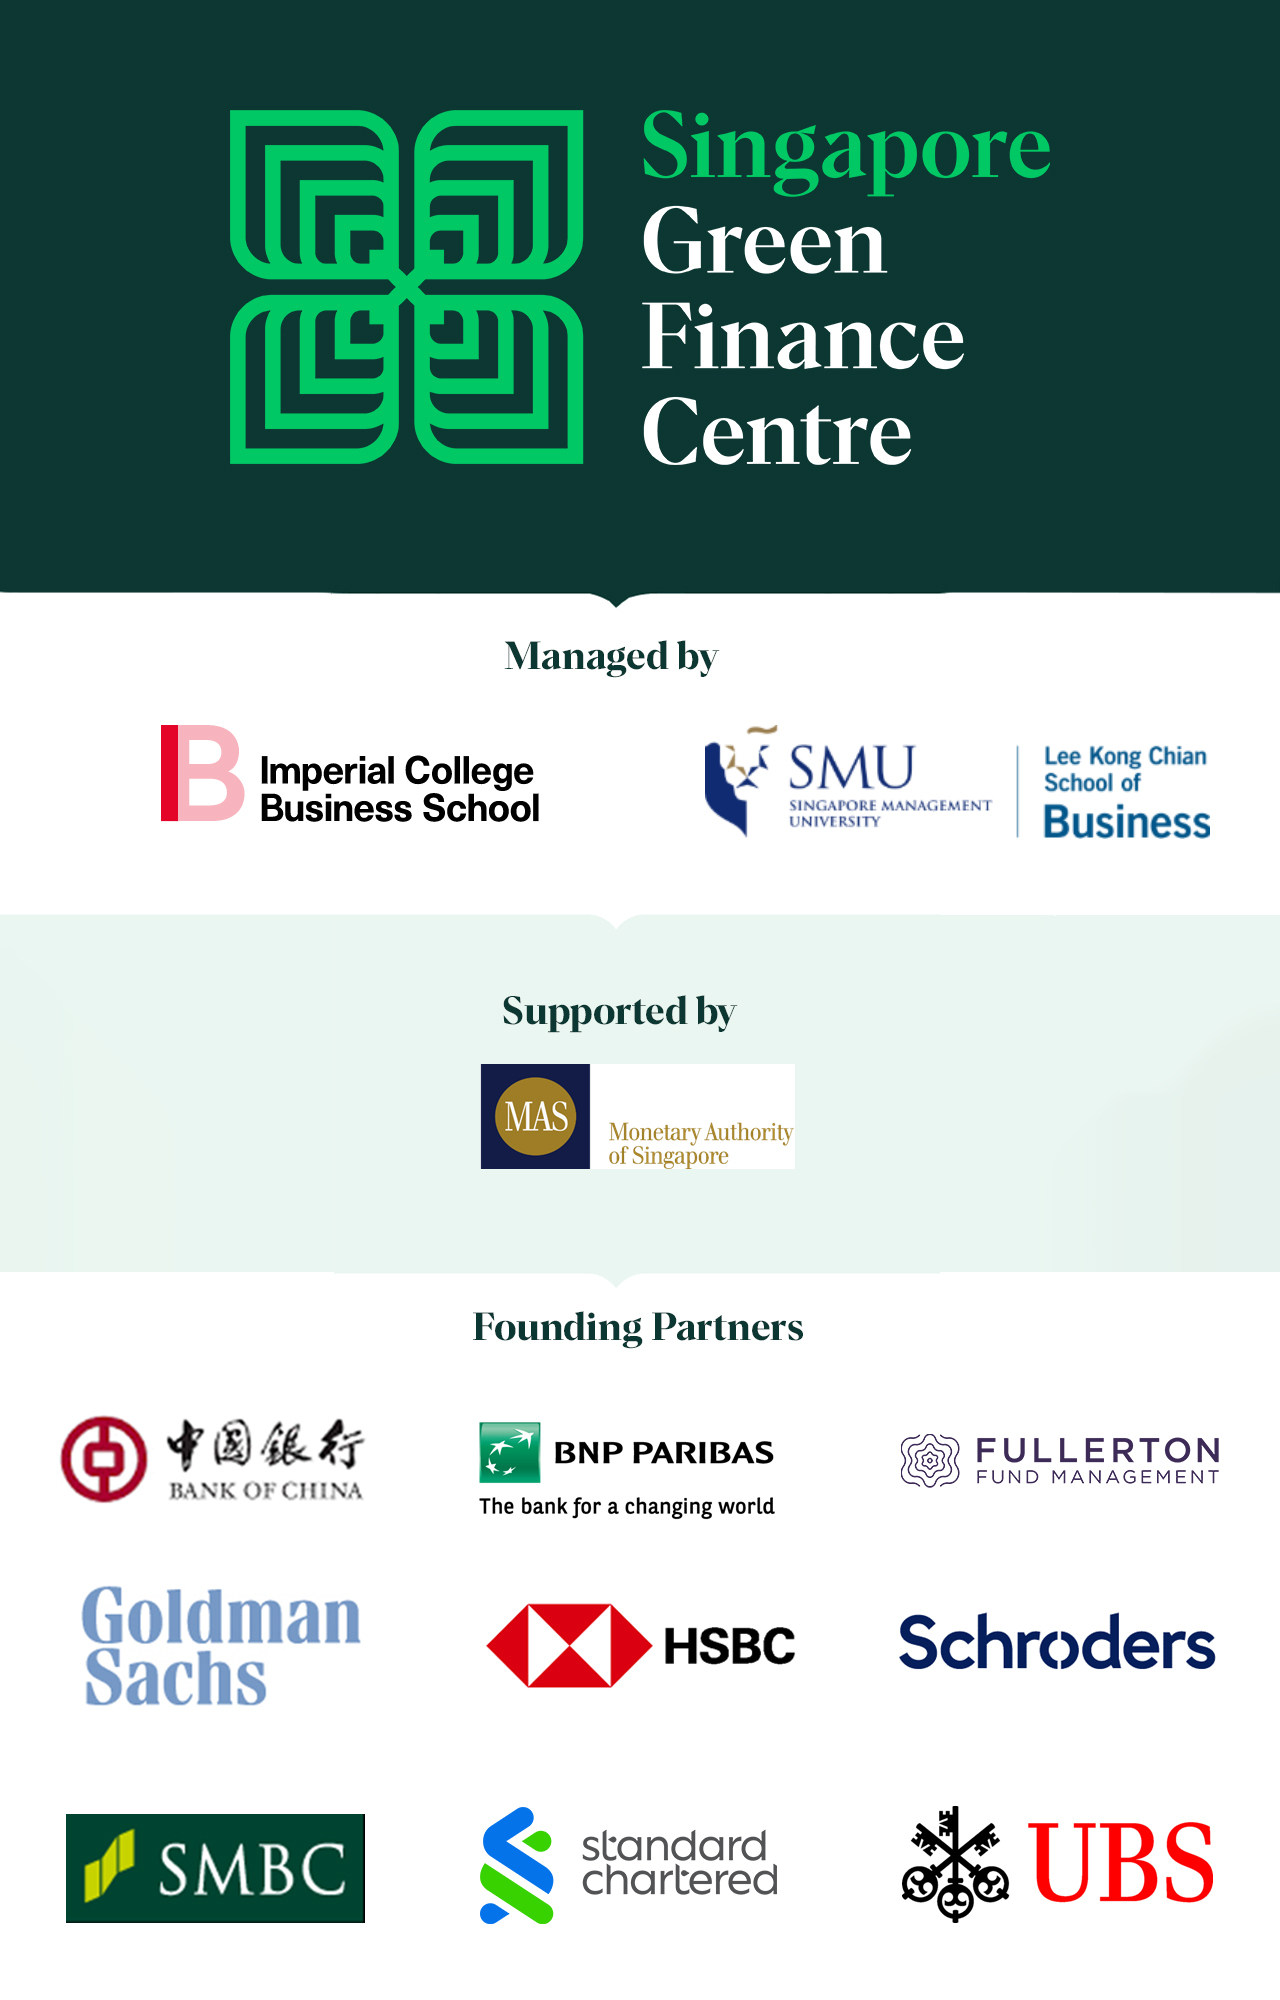 SGFC managed by SKBI & Imperial, supported by MAS, 9 founding partners